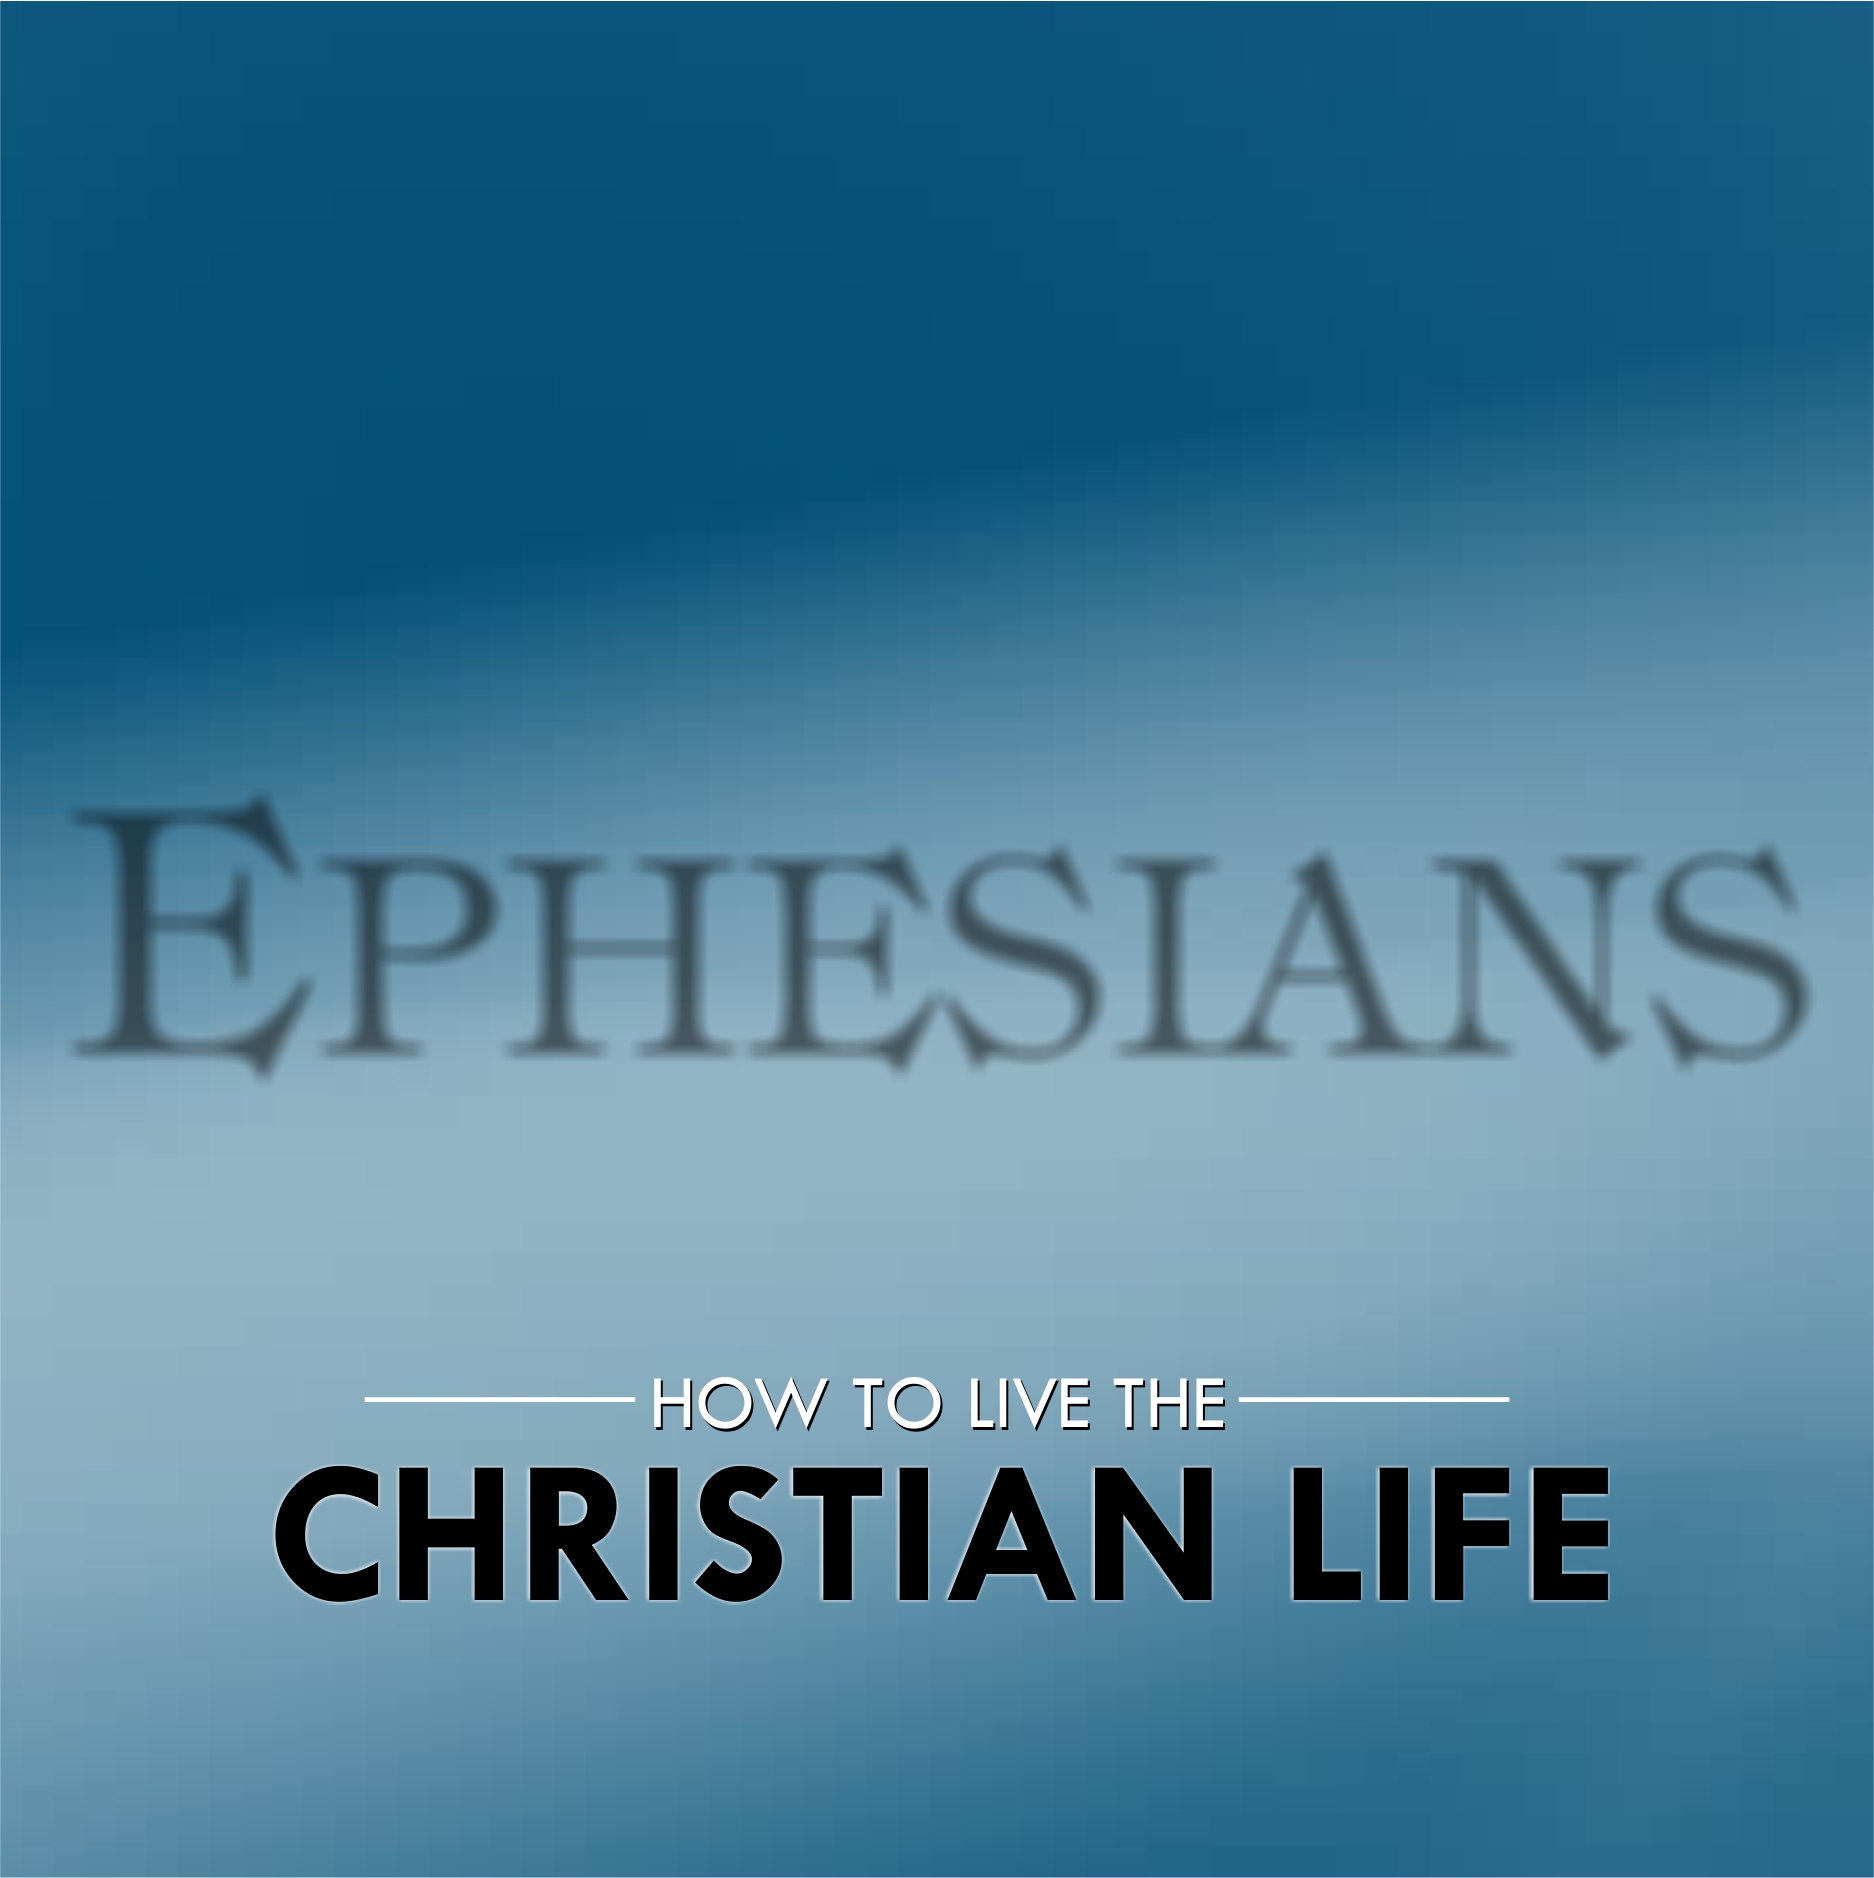 Ephesians - How to Live the Christian Life!